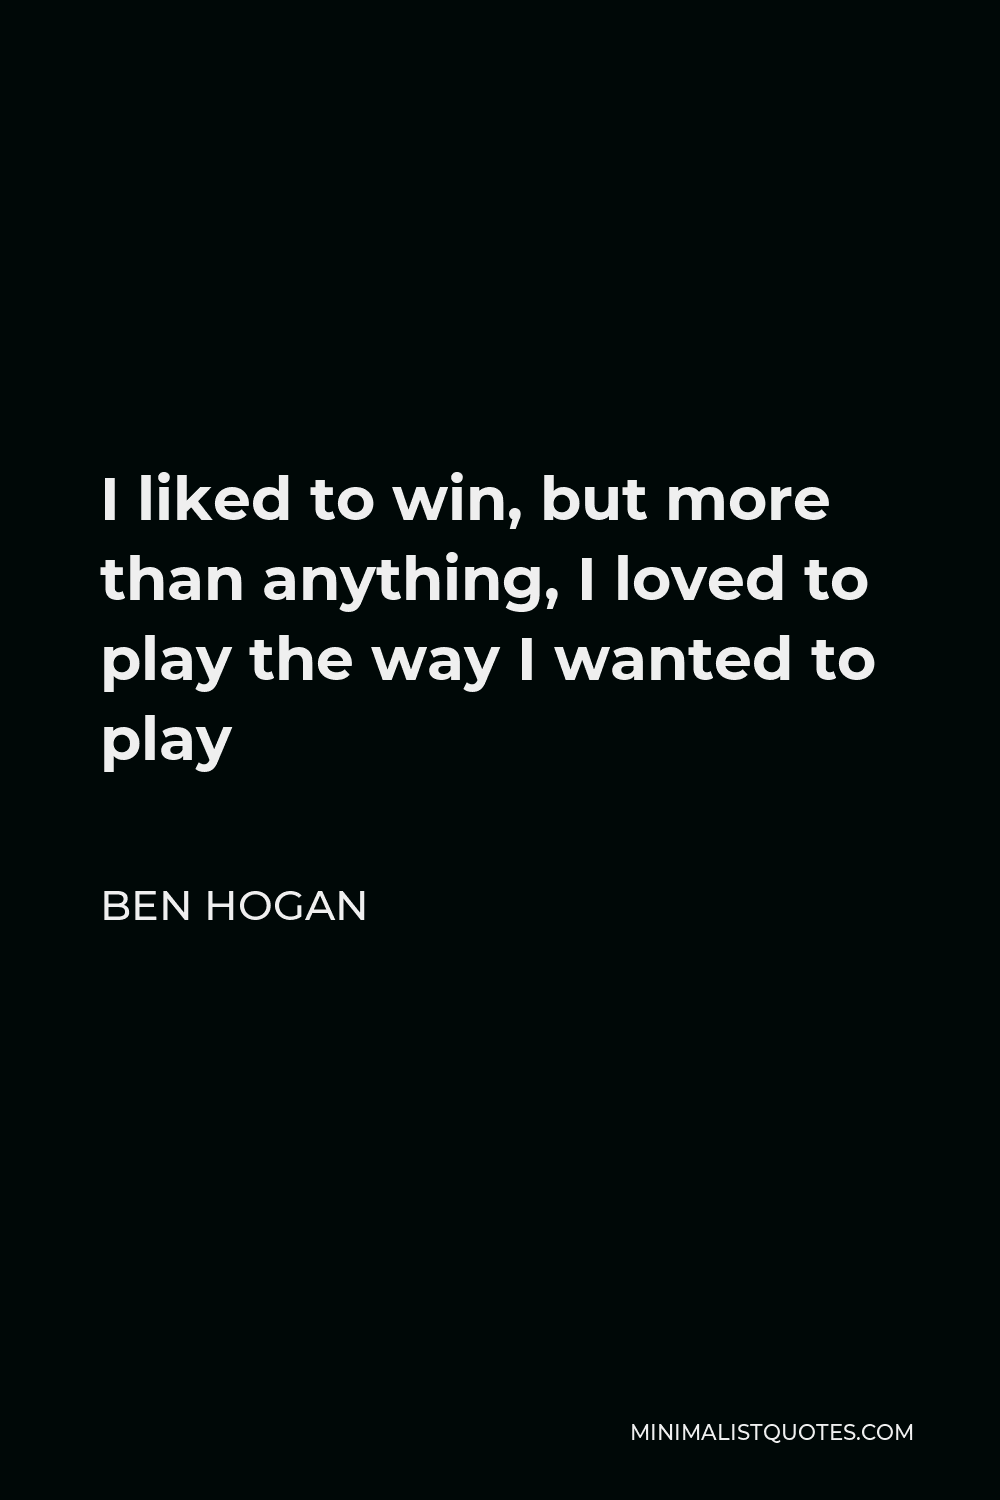 Ben Hogan Quote - I liked to win, but more than anything, I loved to play the way I wanted to play